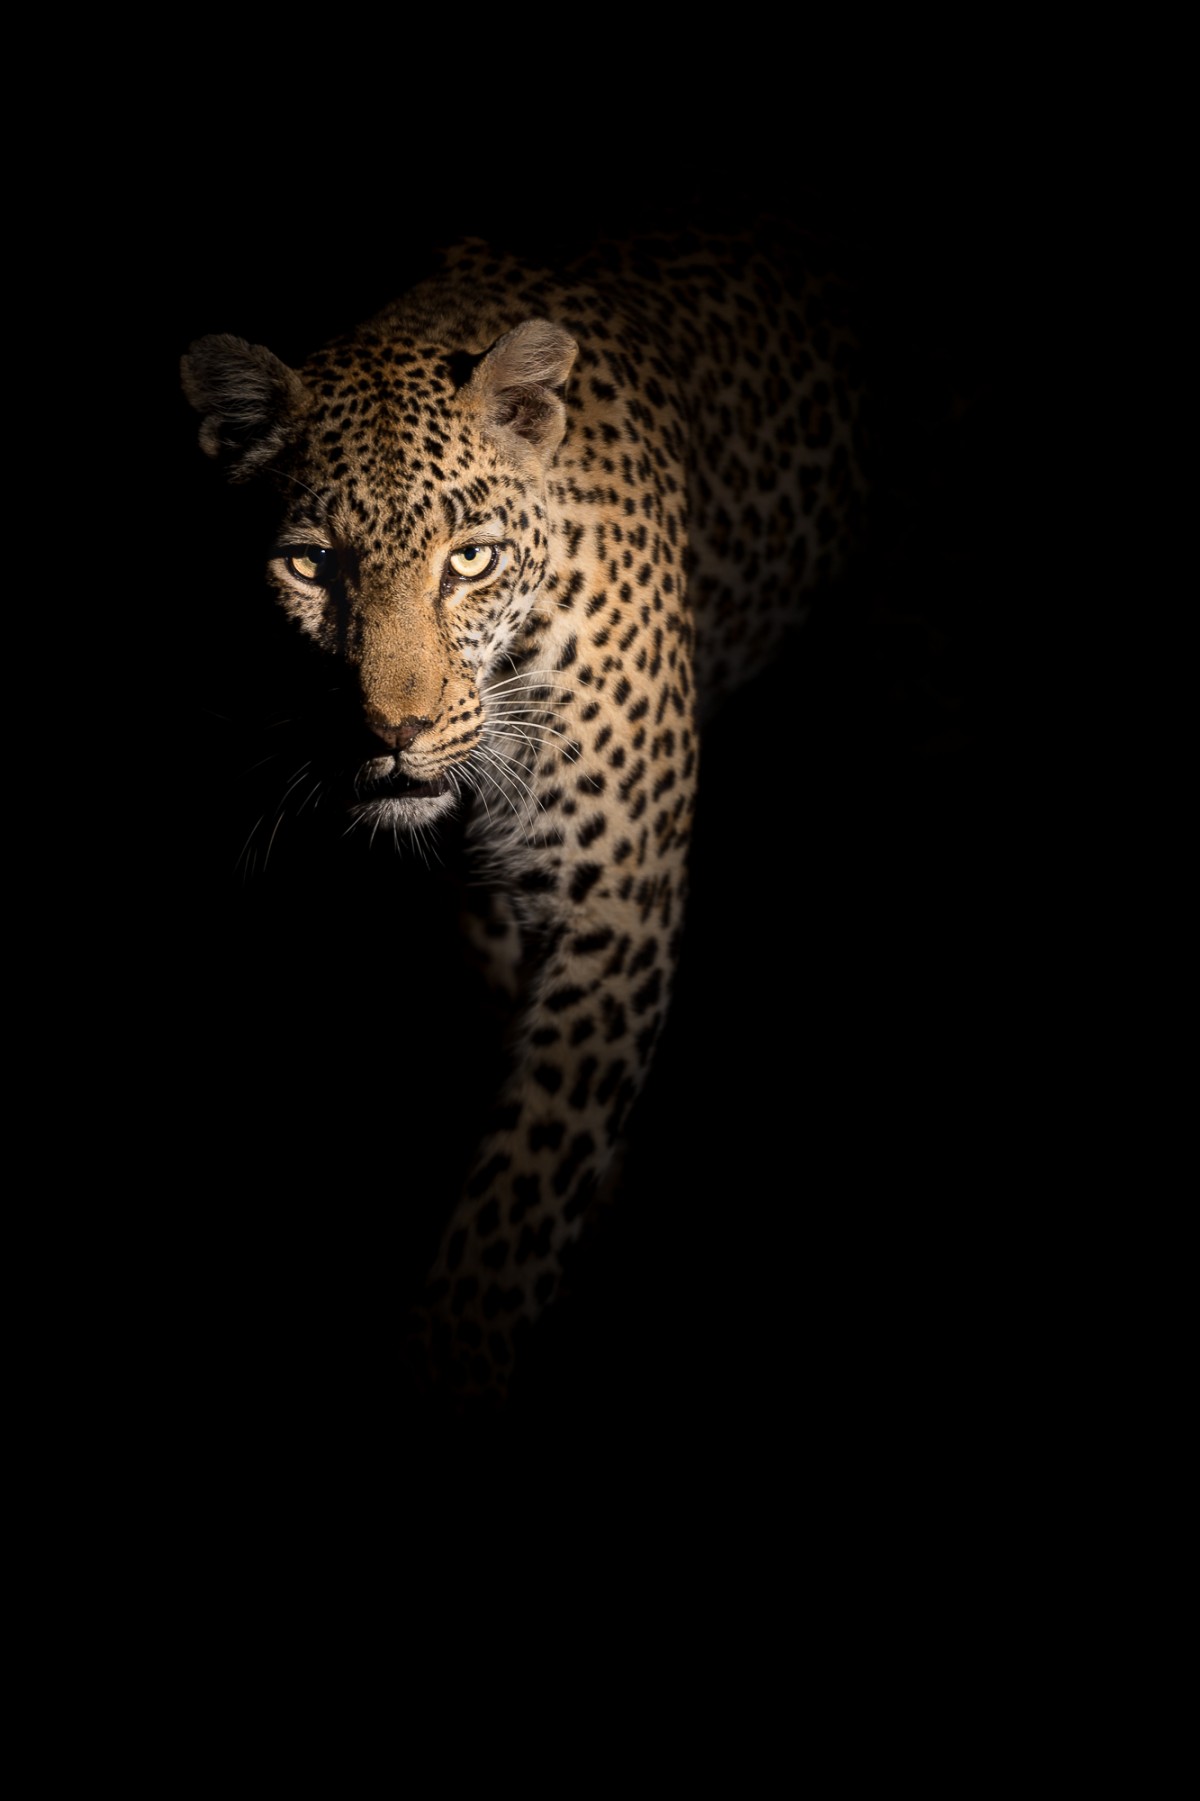 Female leopard during the night